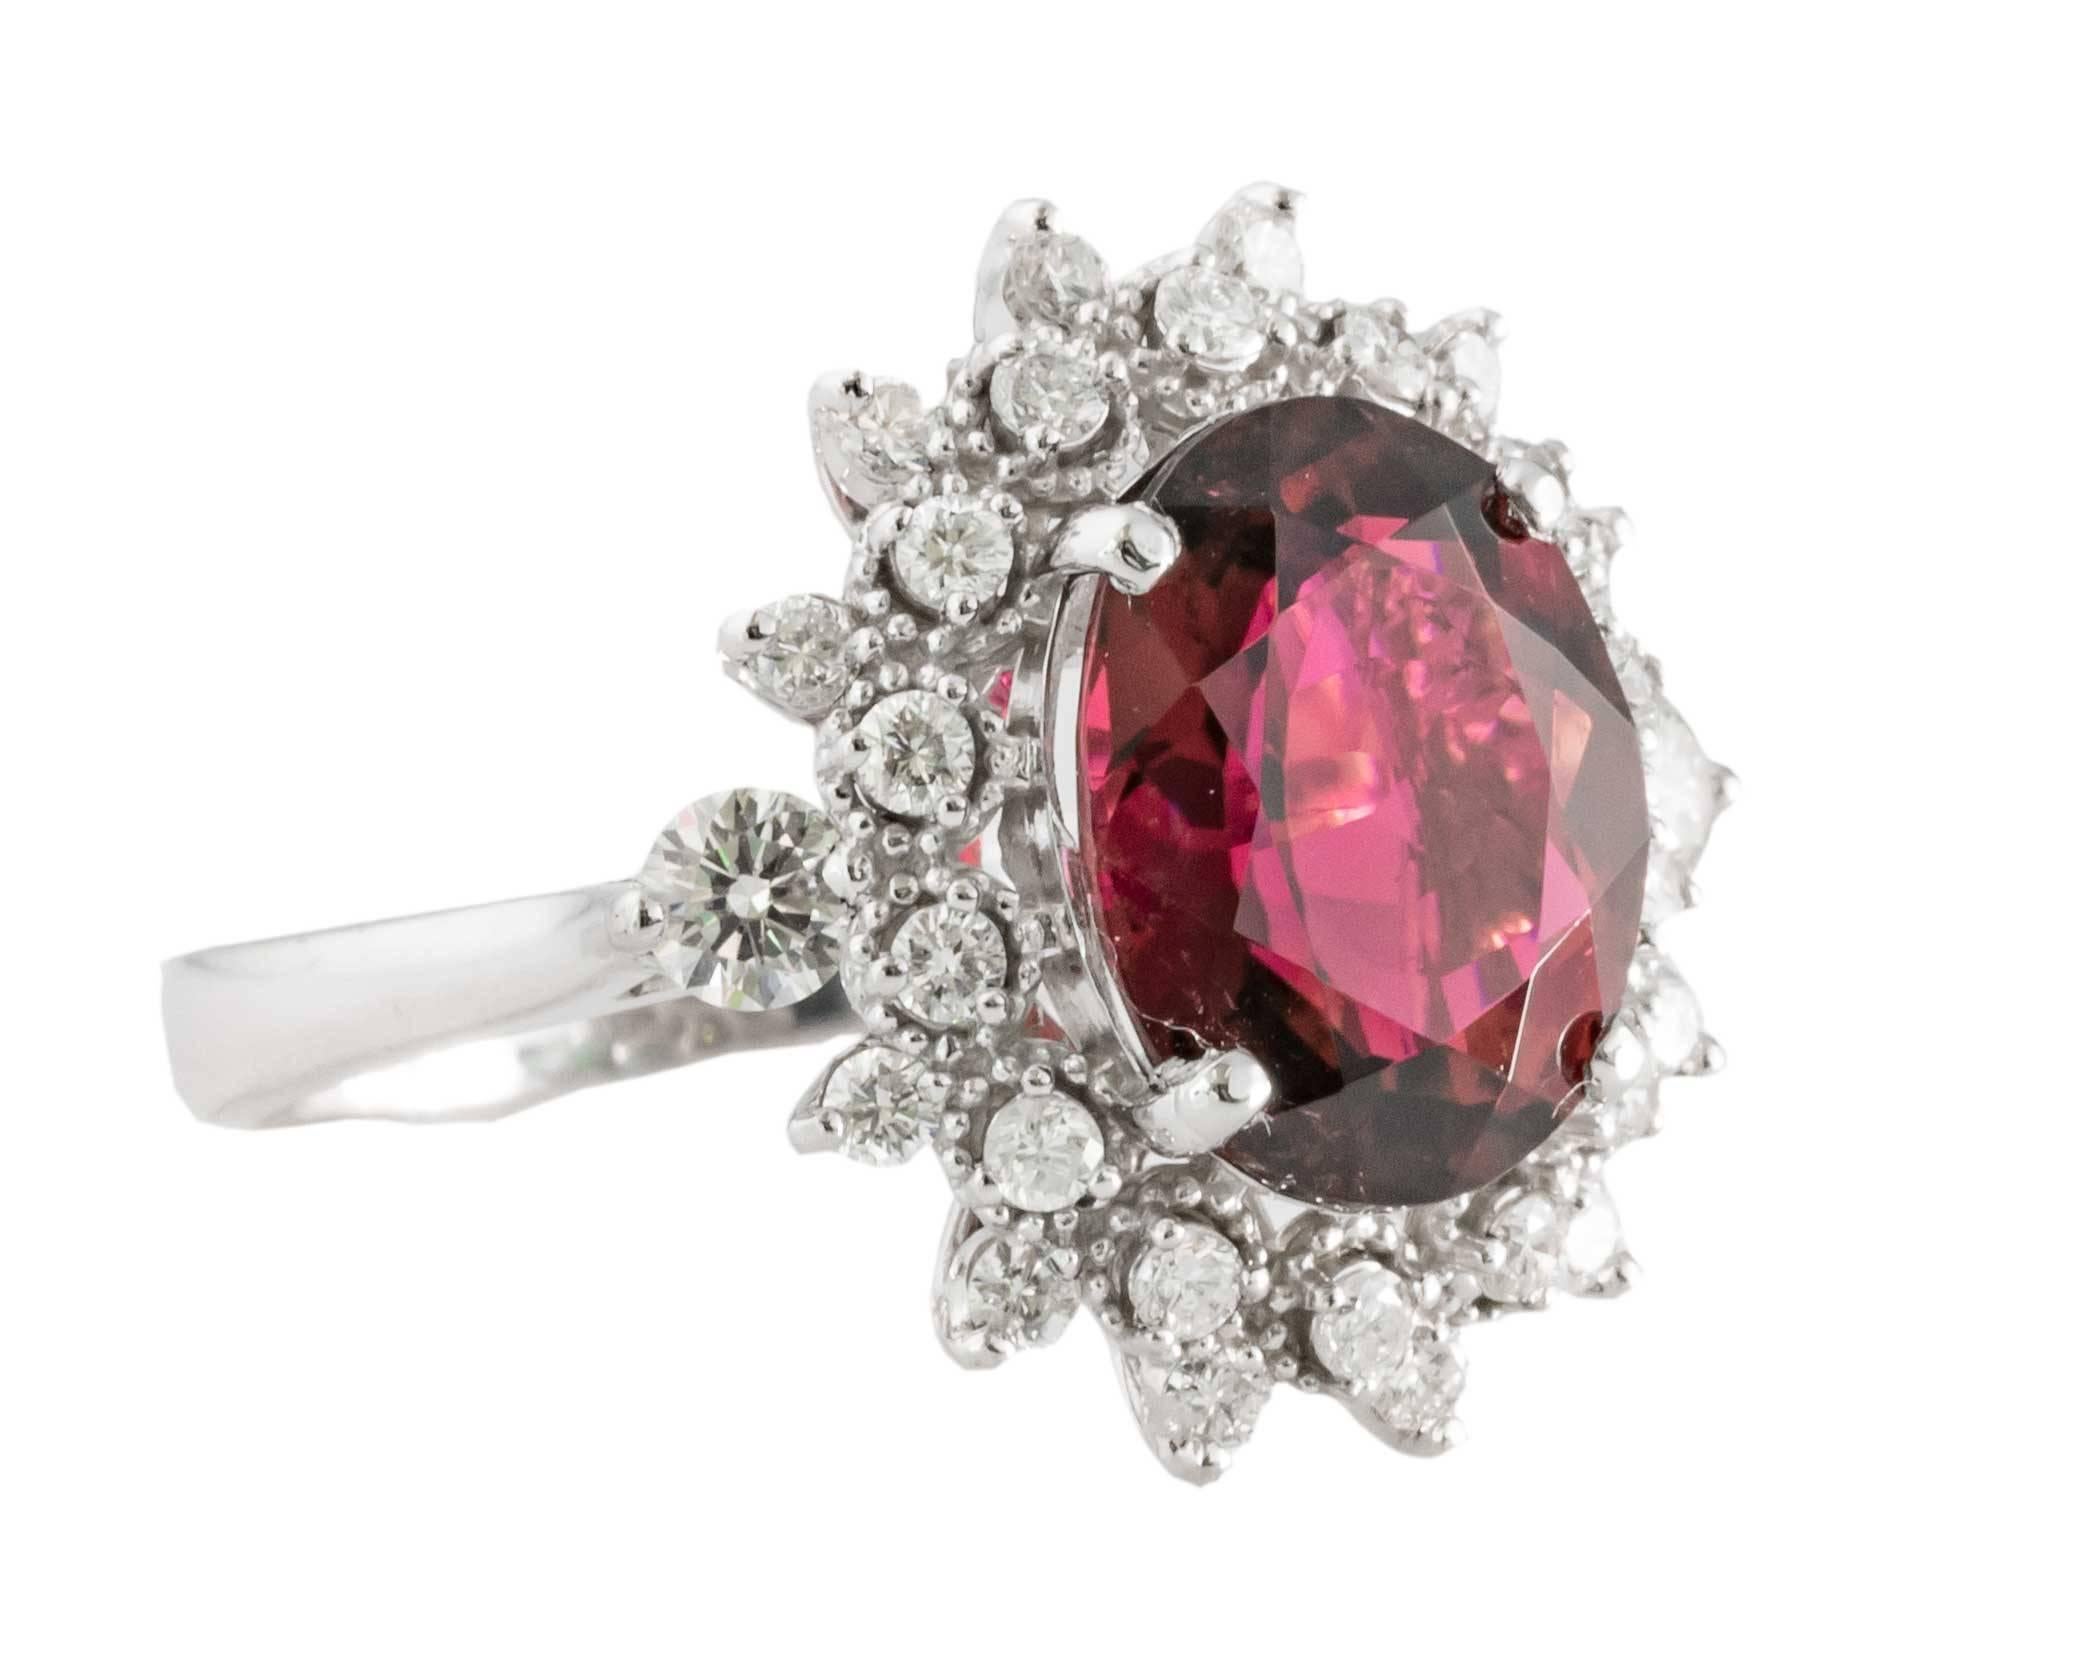 1990s Tourmaline and Diamond Cocktail Ring

Center is a Gorgeous 4 Carat Tourmaline
Oval Brilliant Cut, Natural, Red Tourmaline Prong-Set

Beautifully crafted floral halo of accent diamonds give this ring the perfect amount of sparkle! 
0.80 carats